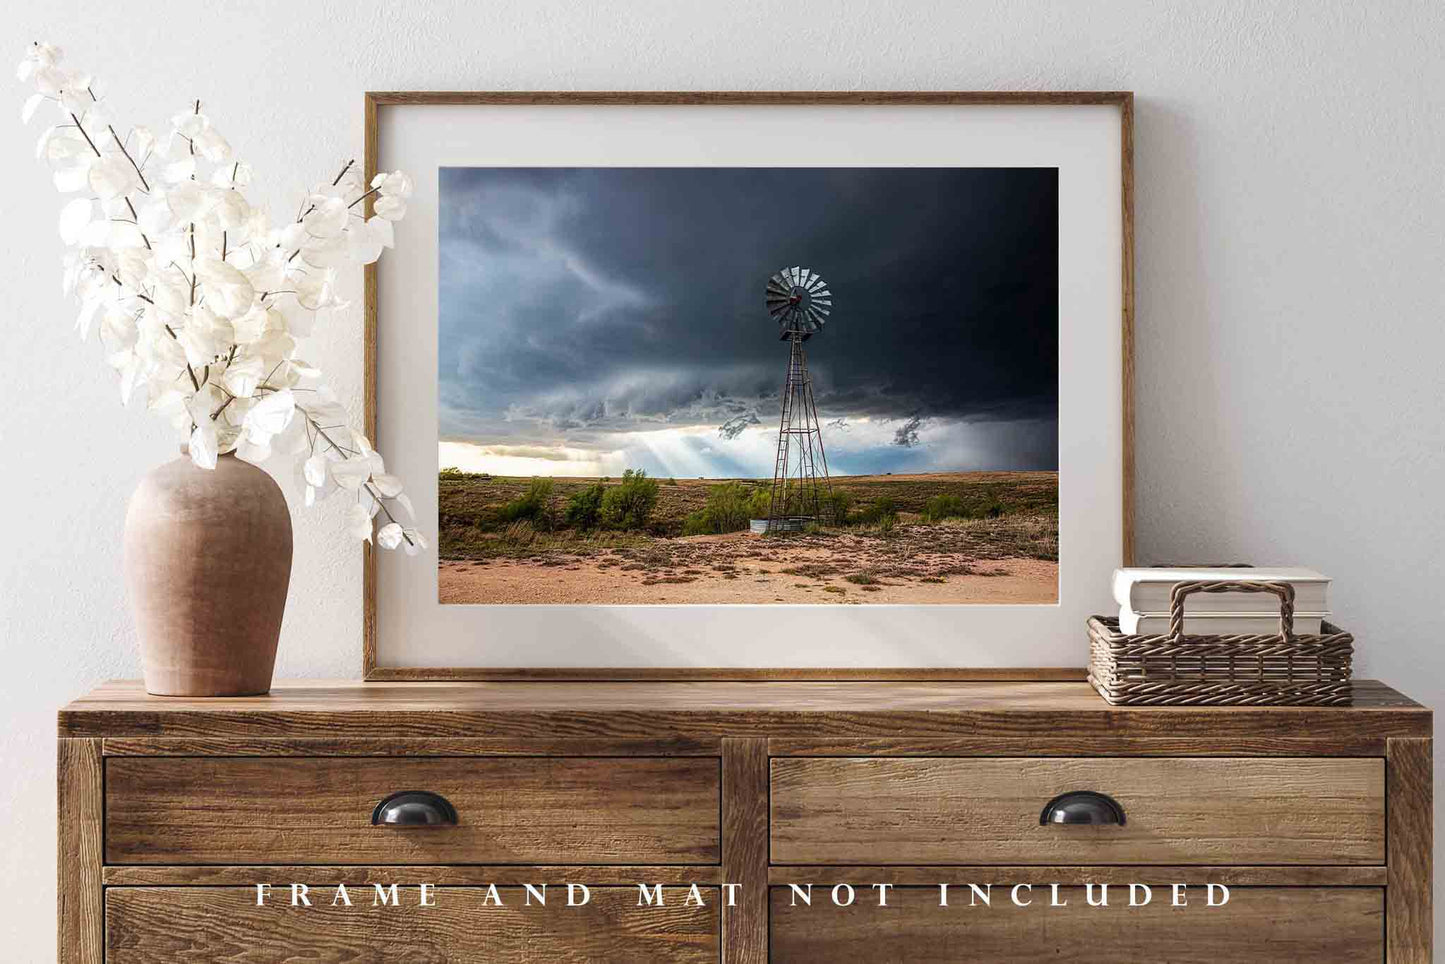 Country Photography Print (Not Framed) Picture of Windmill and Storm as Sunlight Breaks Through in Texas Farm Wall Art Farmhouse Decor